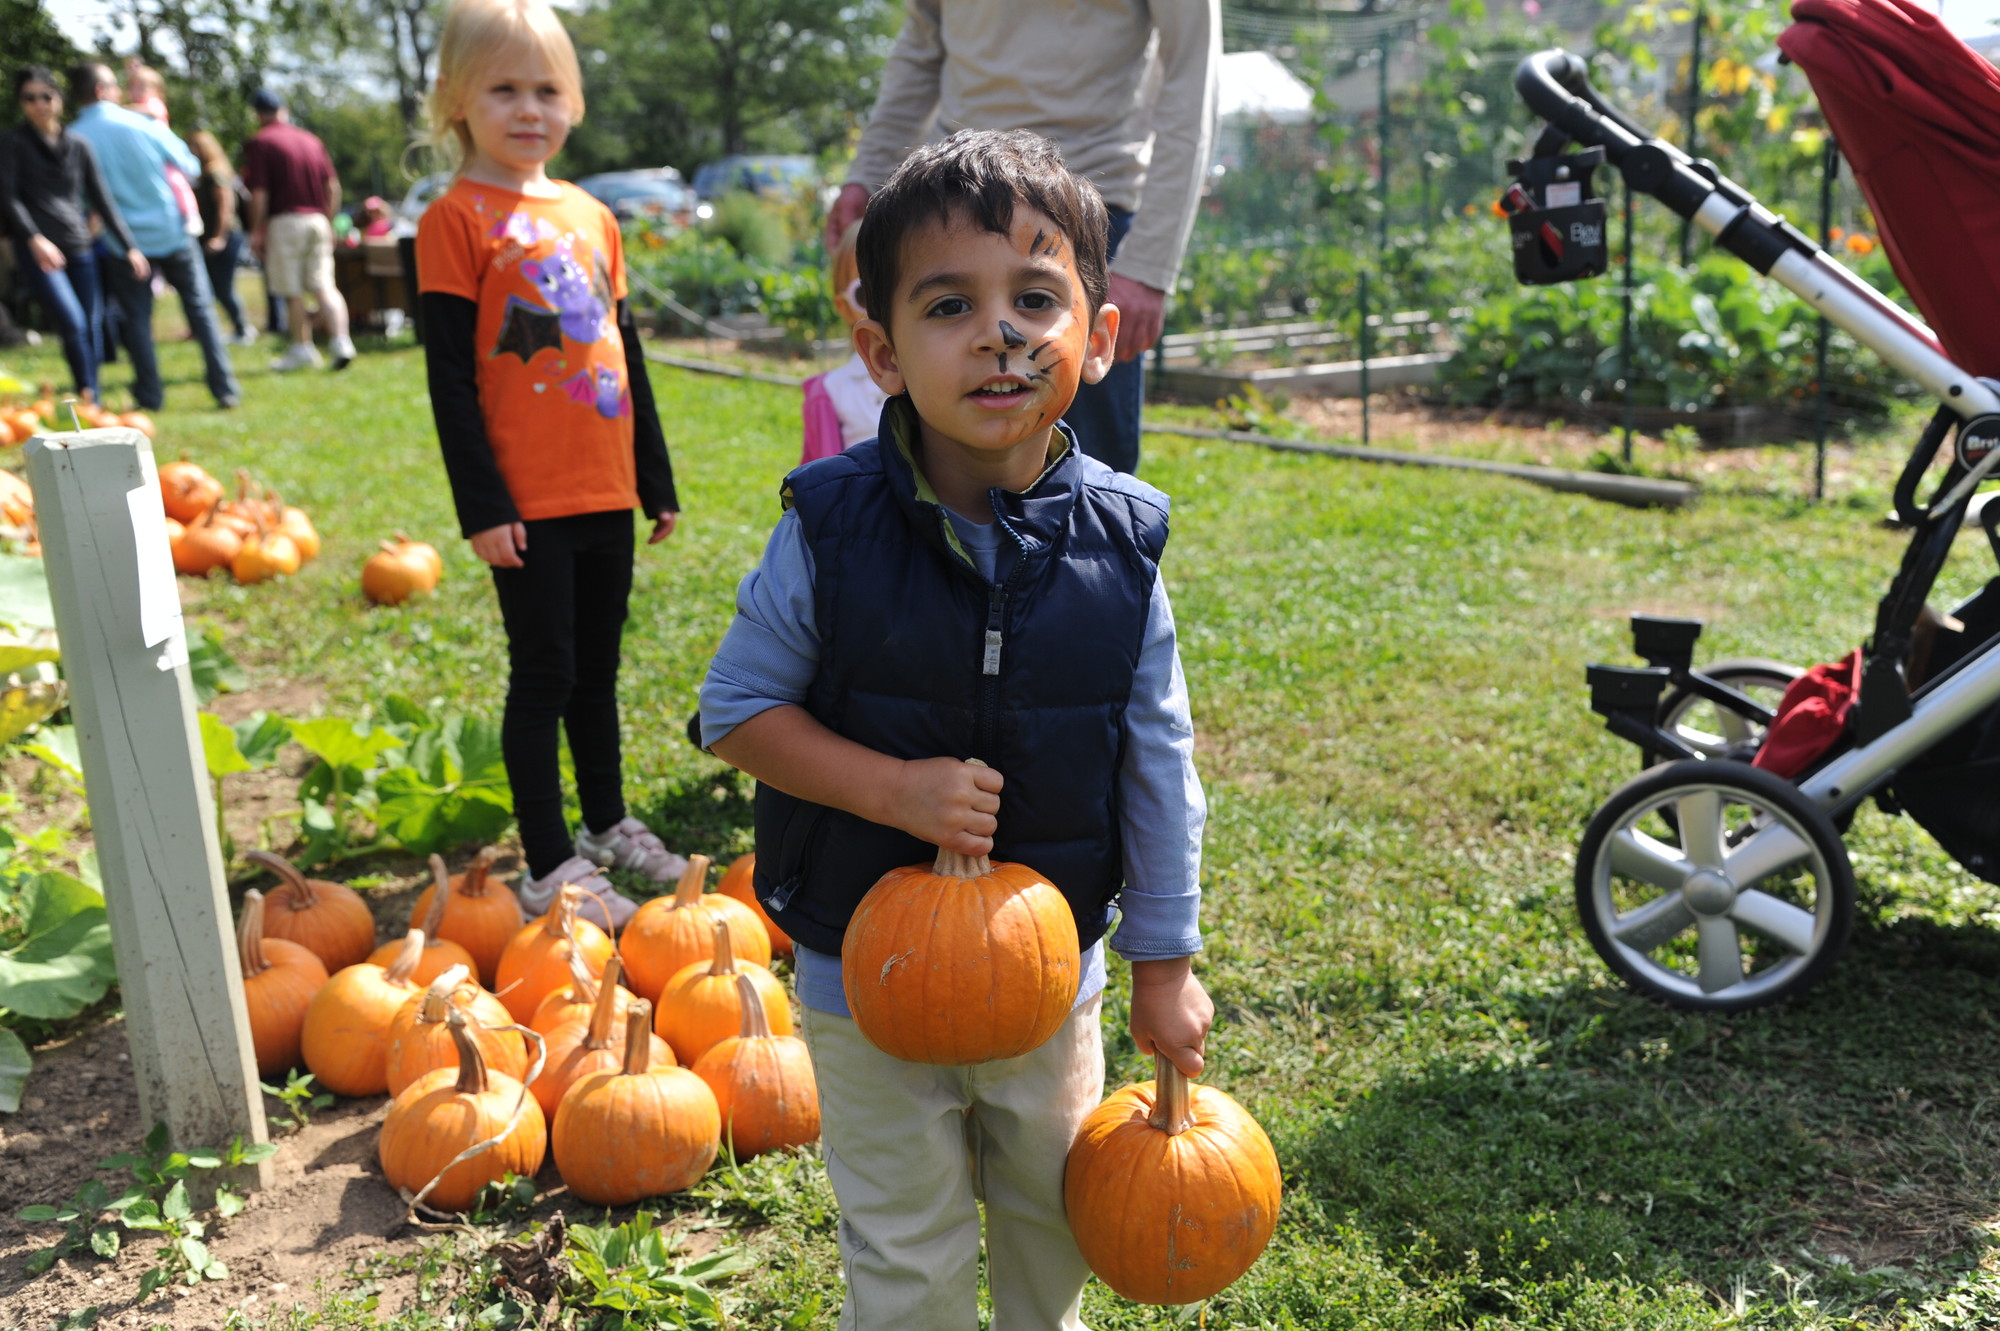 Miles Tobon, 2, picked out his favorite pumpkin at last year's festival at the East Meadow Farm.